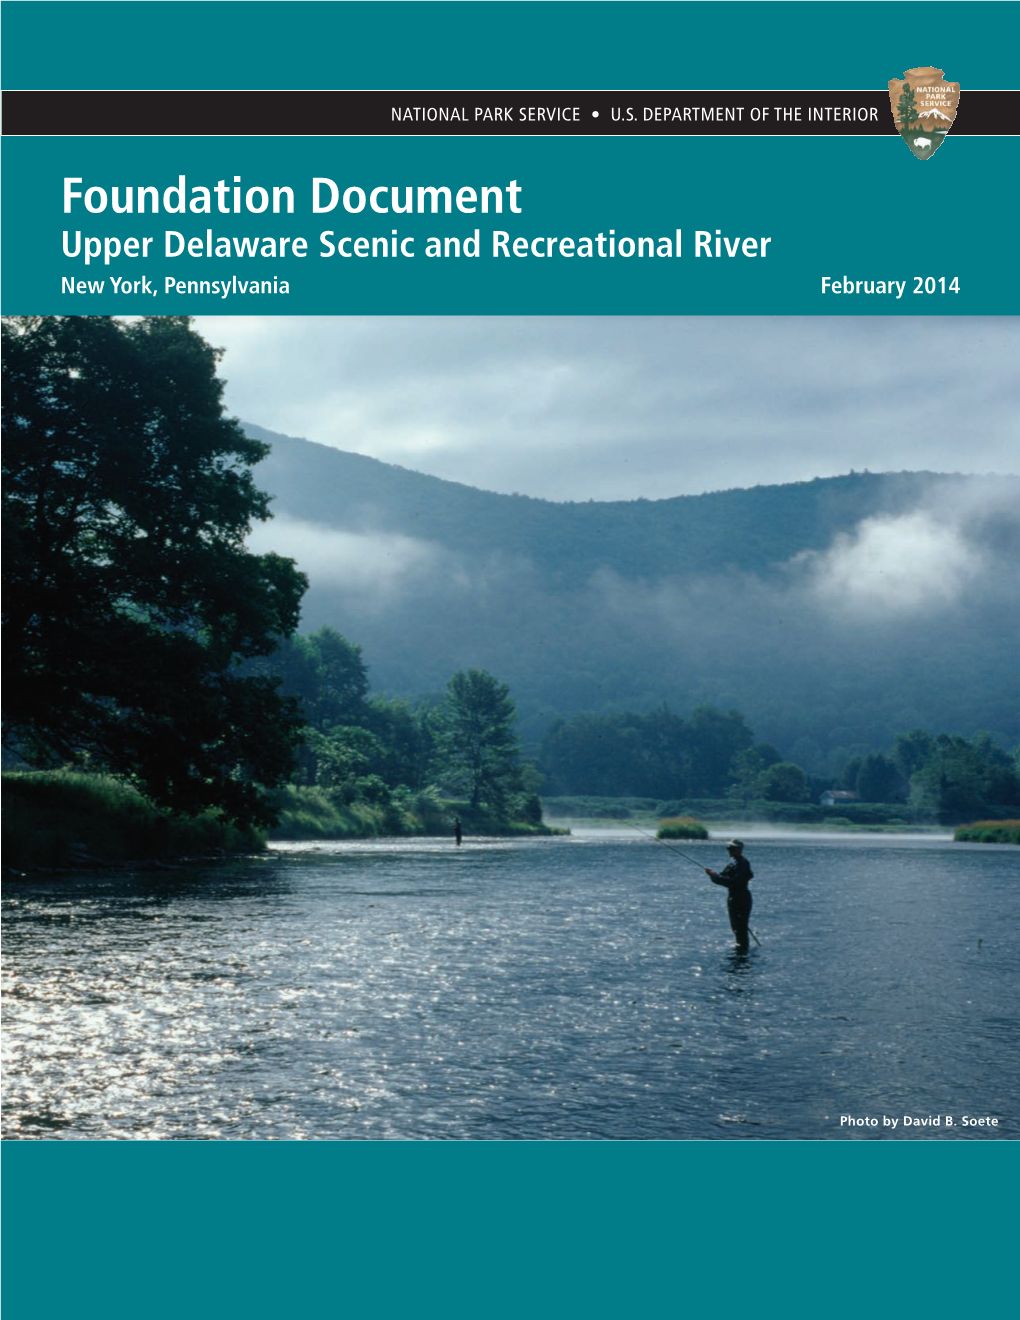 Foundation Document, Upper Delaware Scenic and Recreational